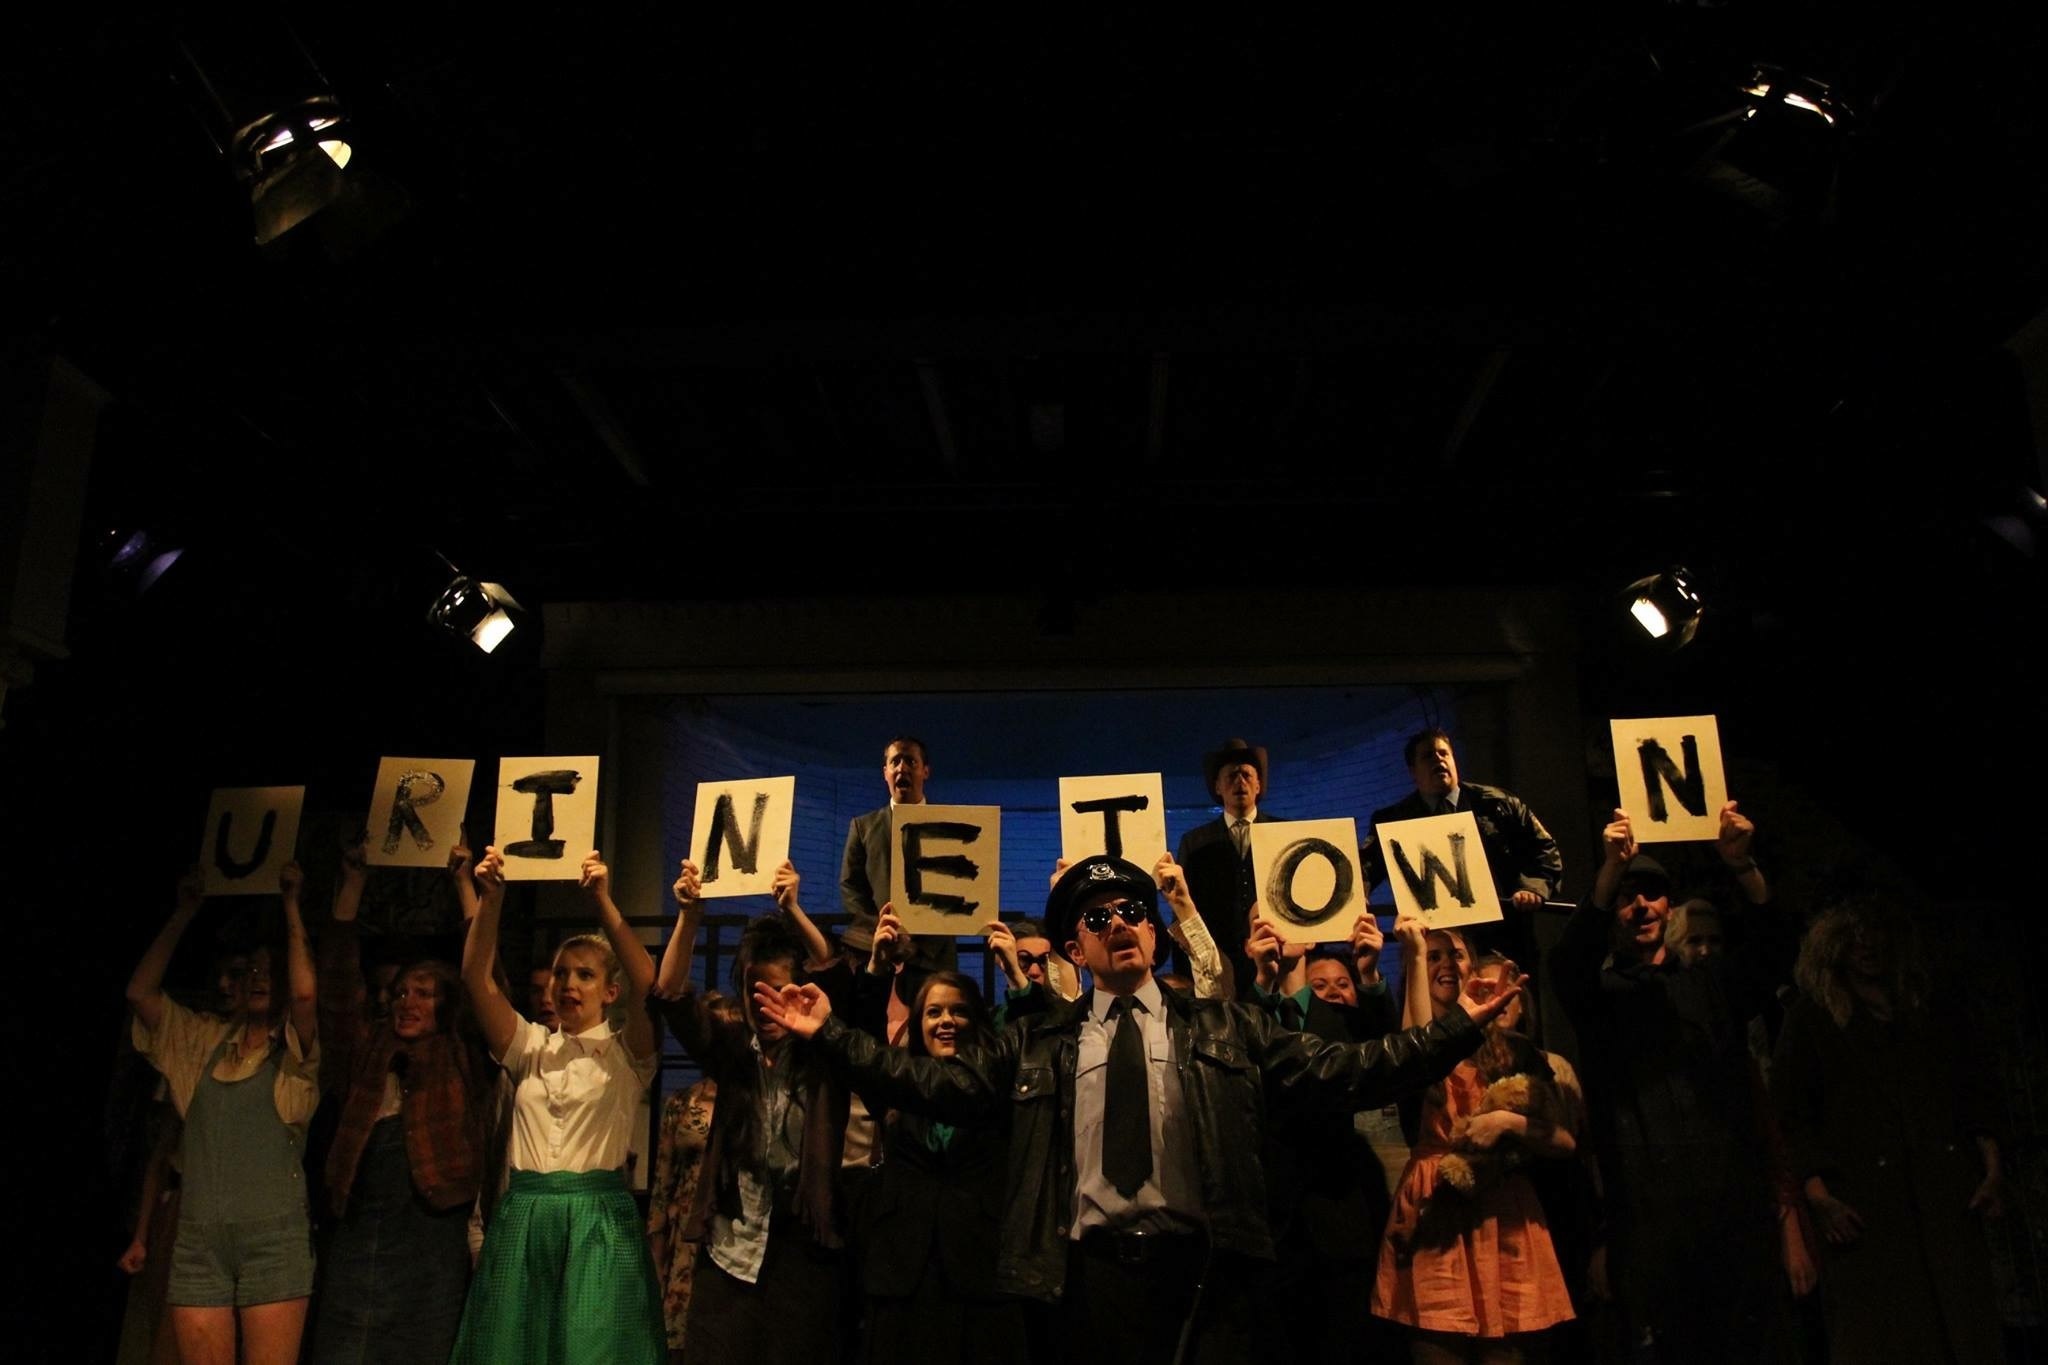 Cast of Urinetown at the Headgate Theatre.